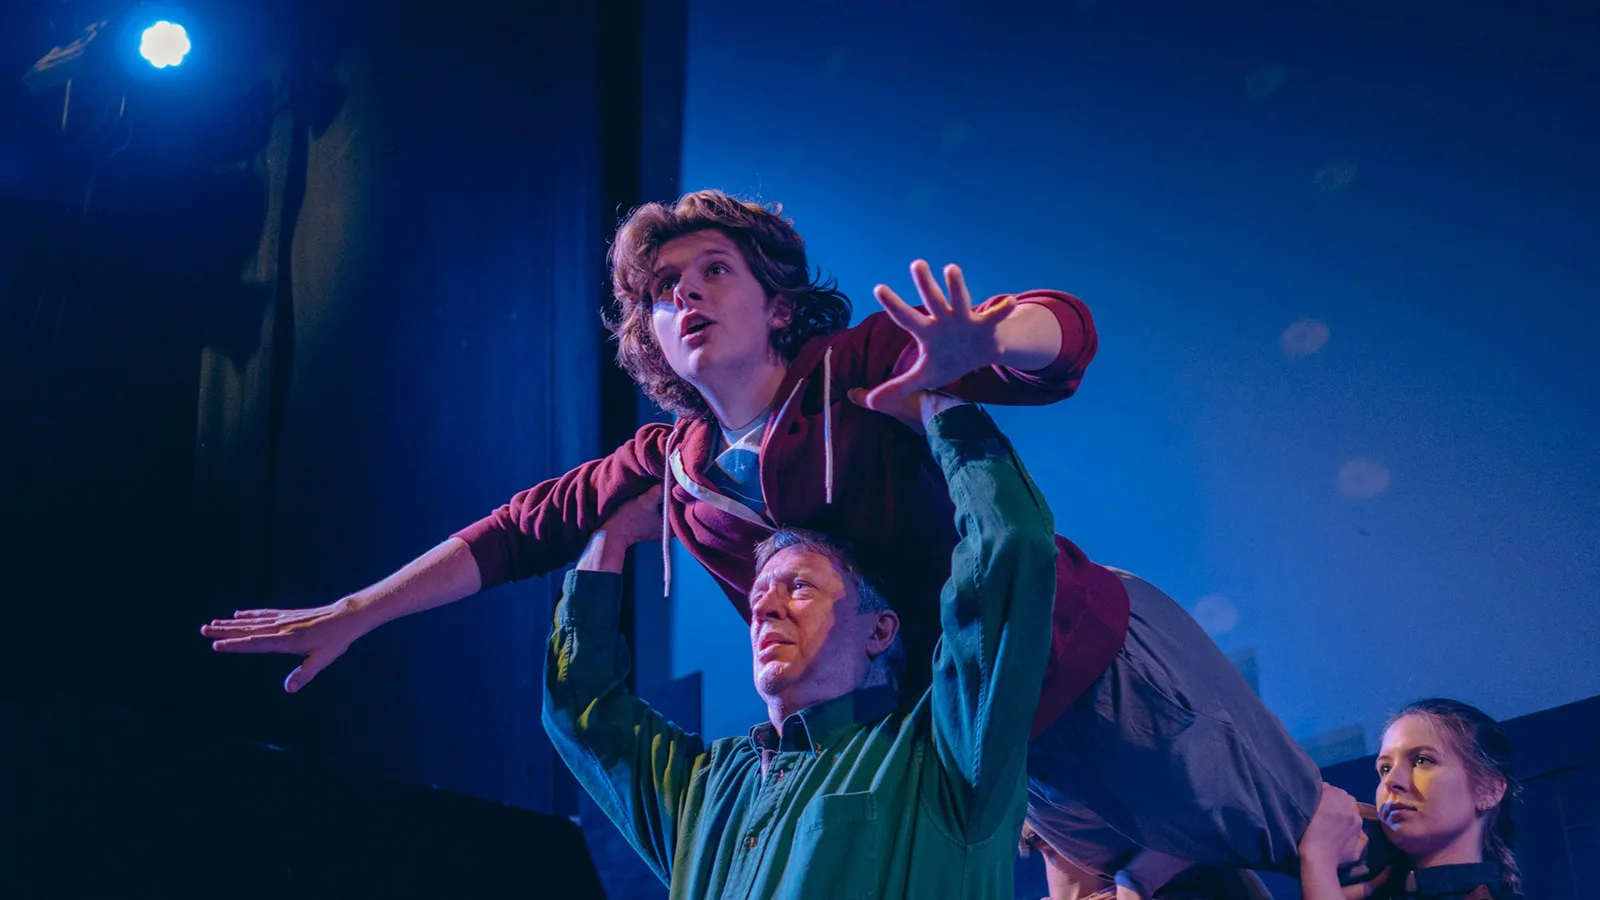 A production photo from the play The Curious Incident of the Dog in the Night-Time. The main character, Christopher is lifted into the air, Superman-style by his dad and a woman.